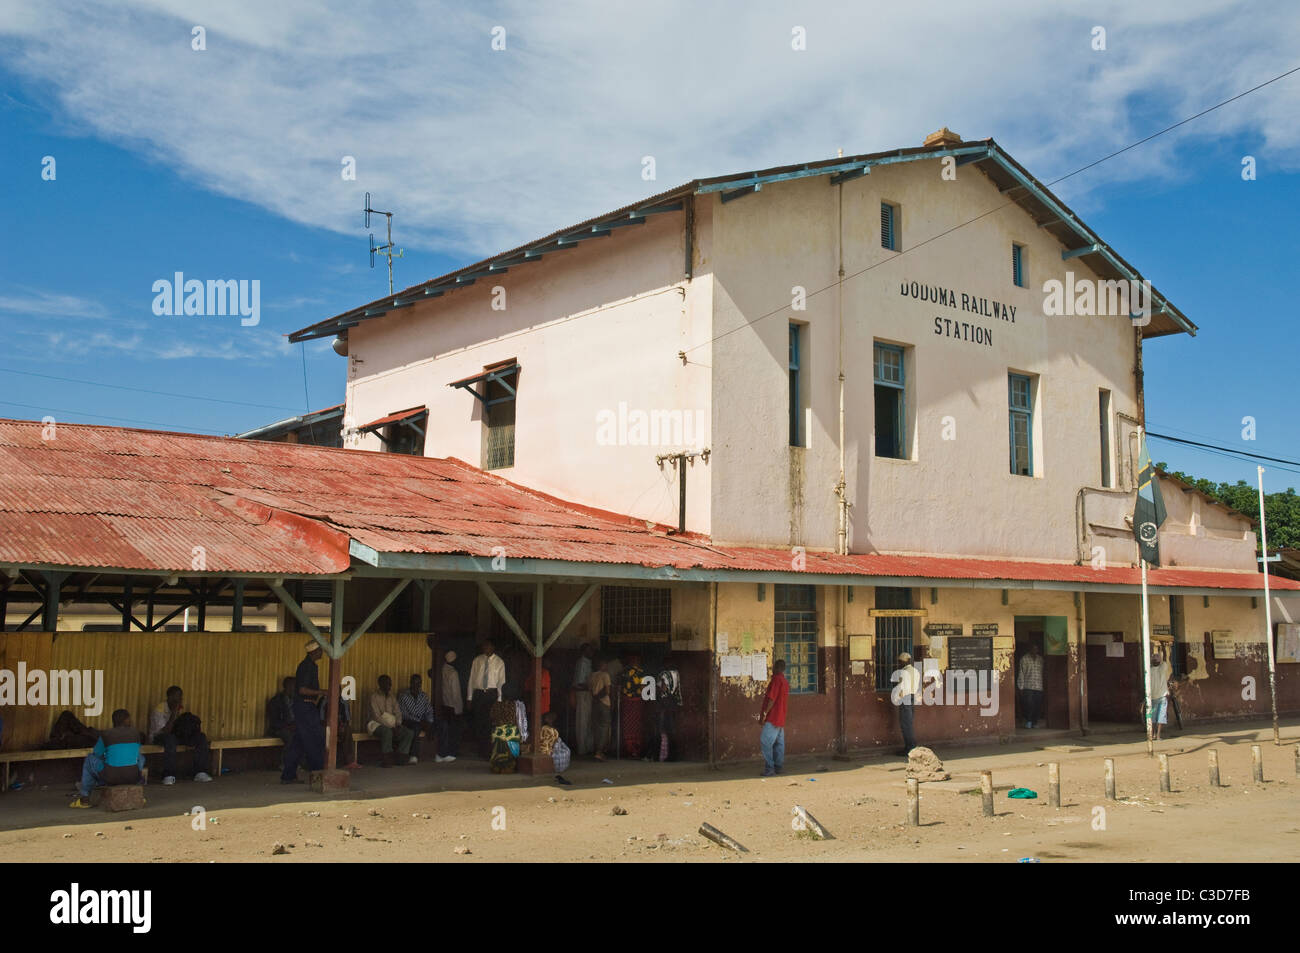 Railway station in Dodoma Tanzania built by the Germans in 1910 Stock Photo